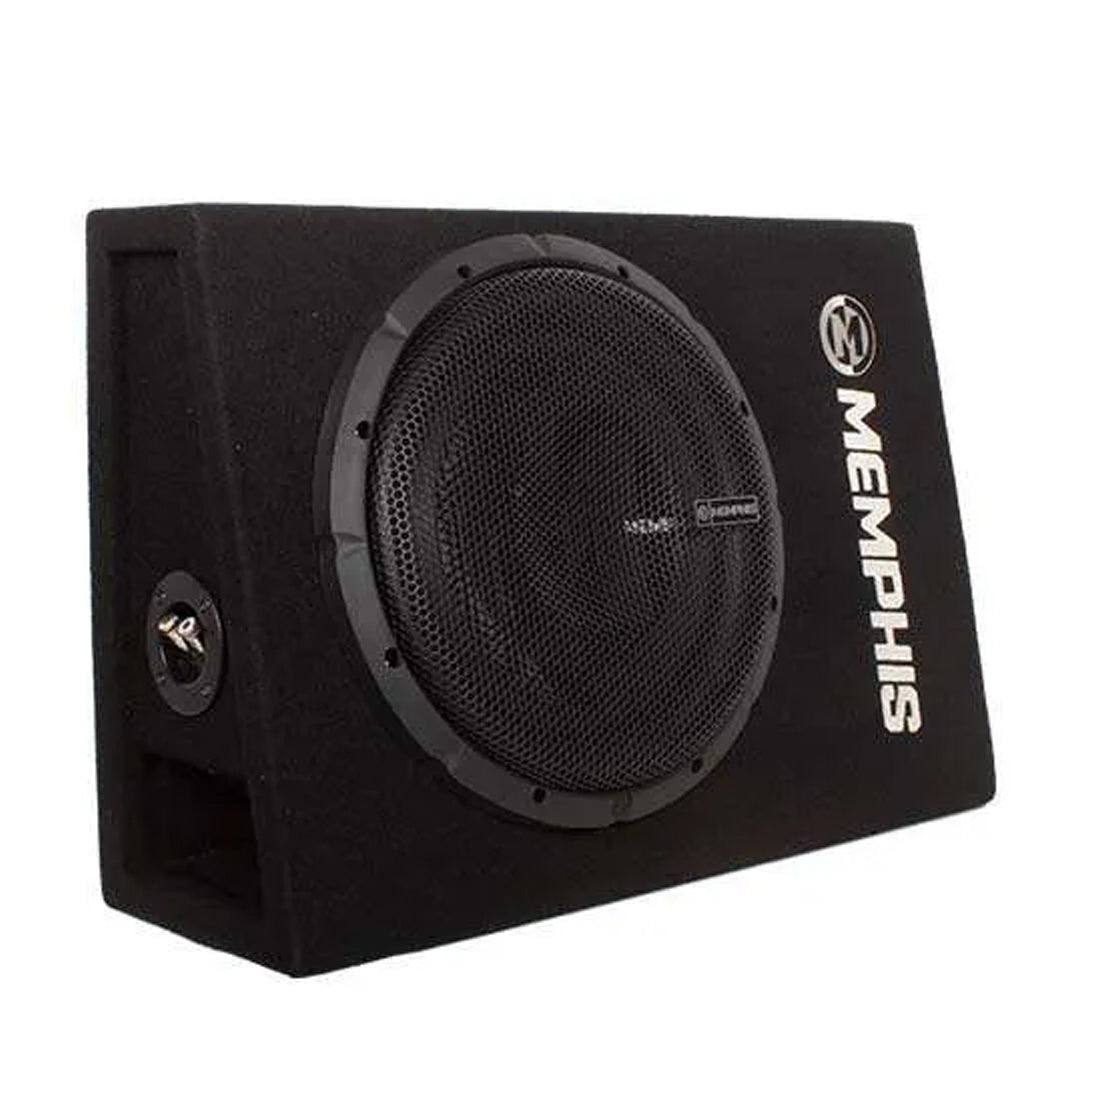 Memphis Audio PRXS112SP Power Reference 12" Shallow Loaded Subwoofer Enclosure